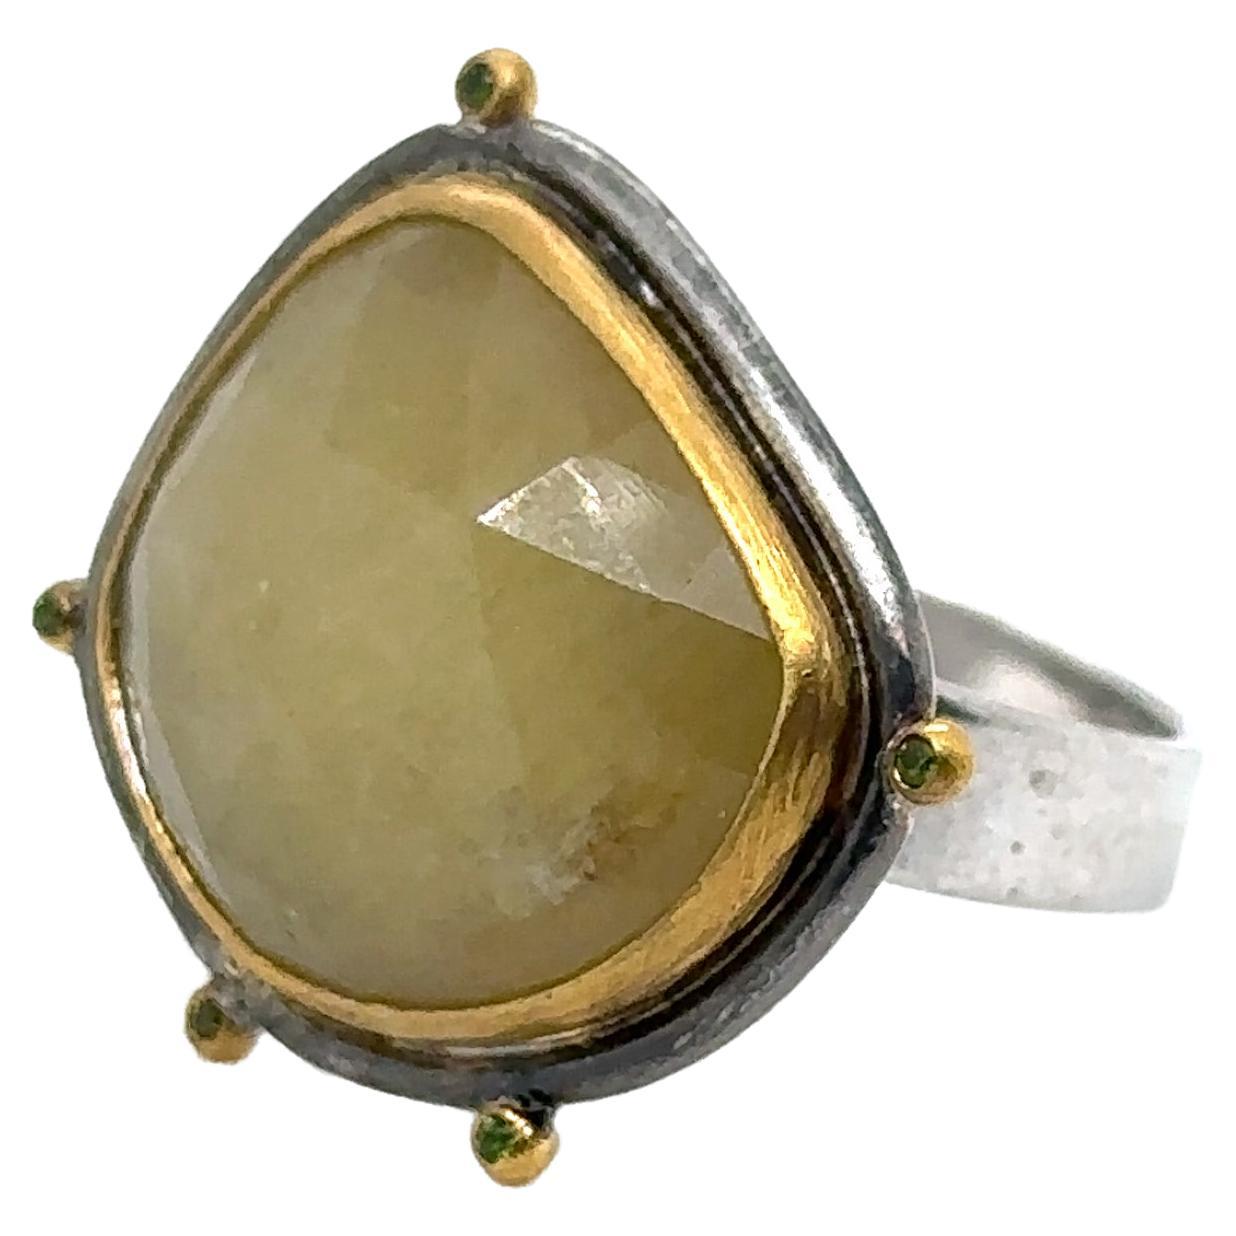 JAS-19-1835 - 24K/SS HANDMADE RING w CHROME DIOPSIDES & NATURAL YELLOW SAPPHIRE